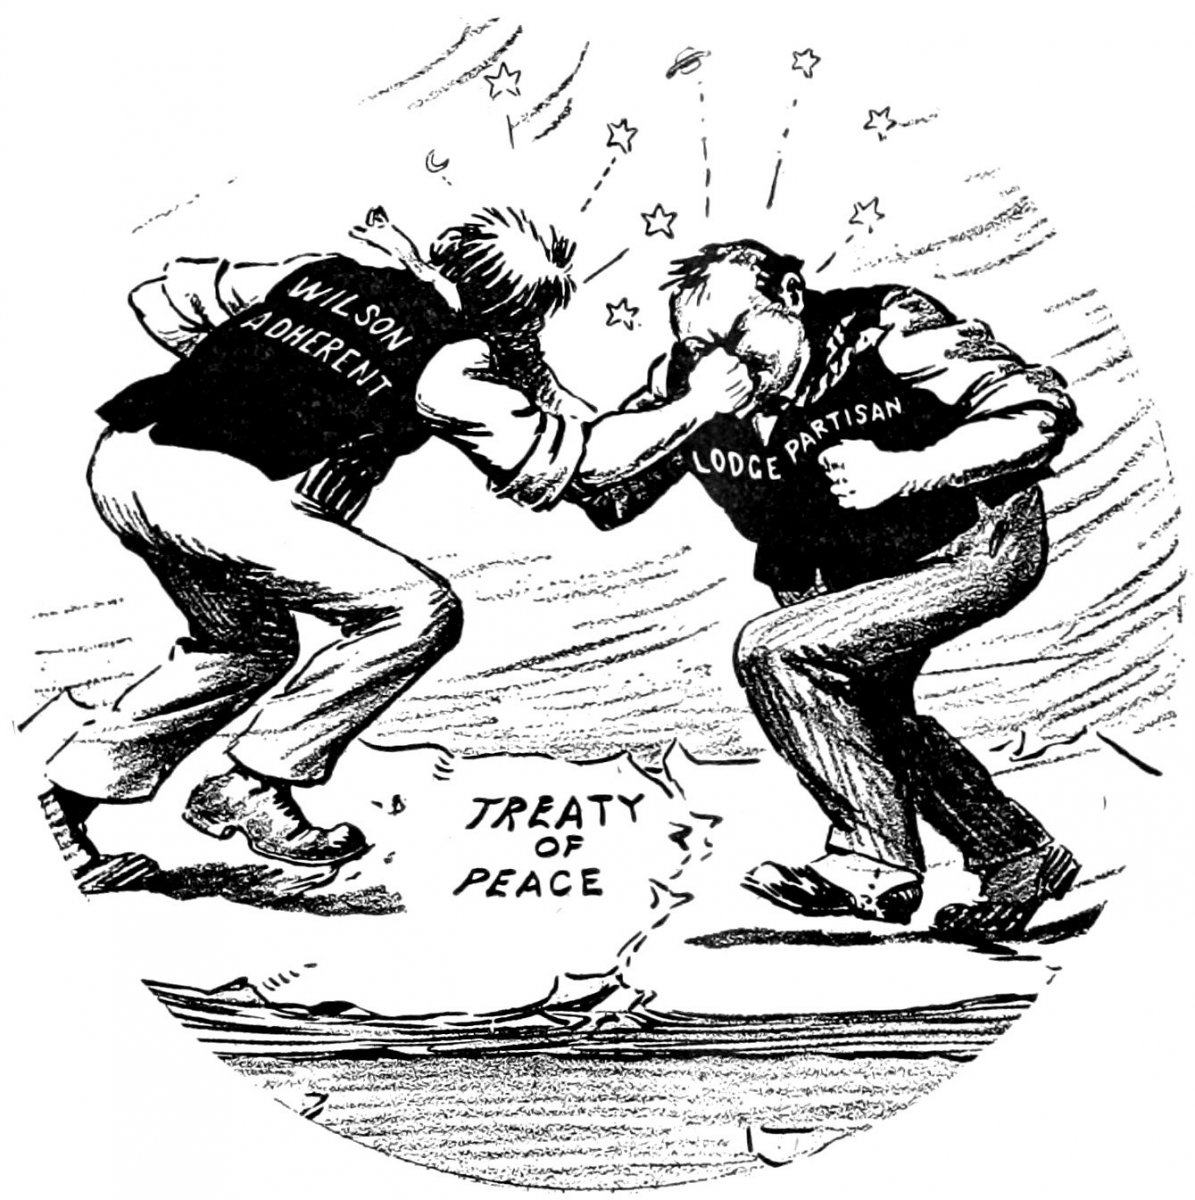 'Getting Together on the Peace Treaty,' a 1920 cartoon depicting a brawl between supporters of Wilson and Lodge.